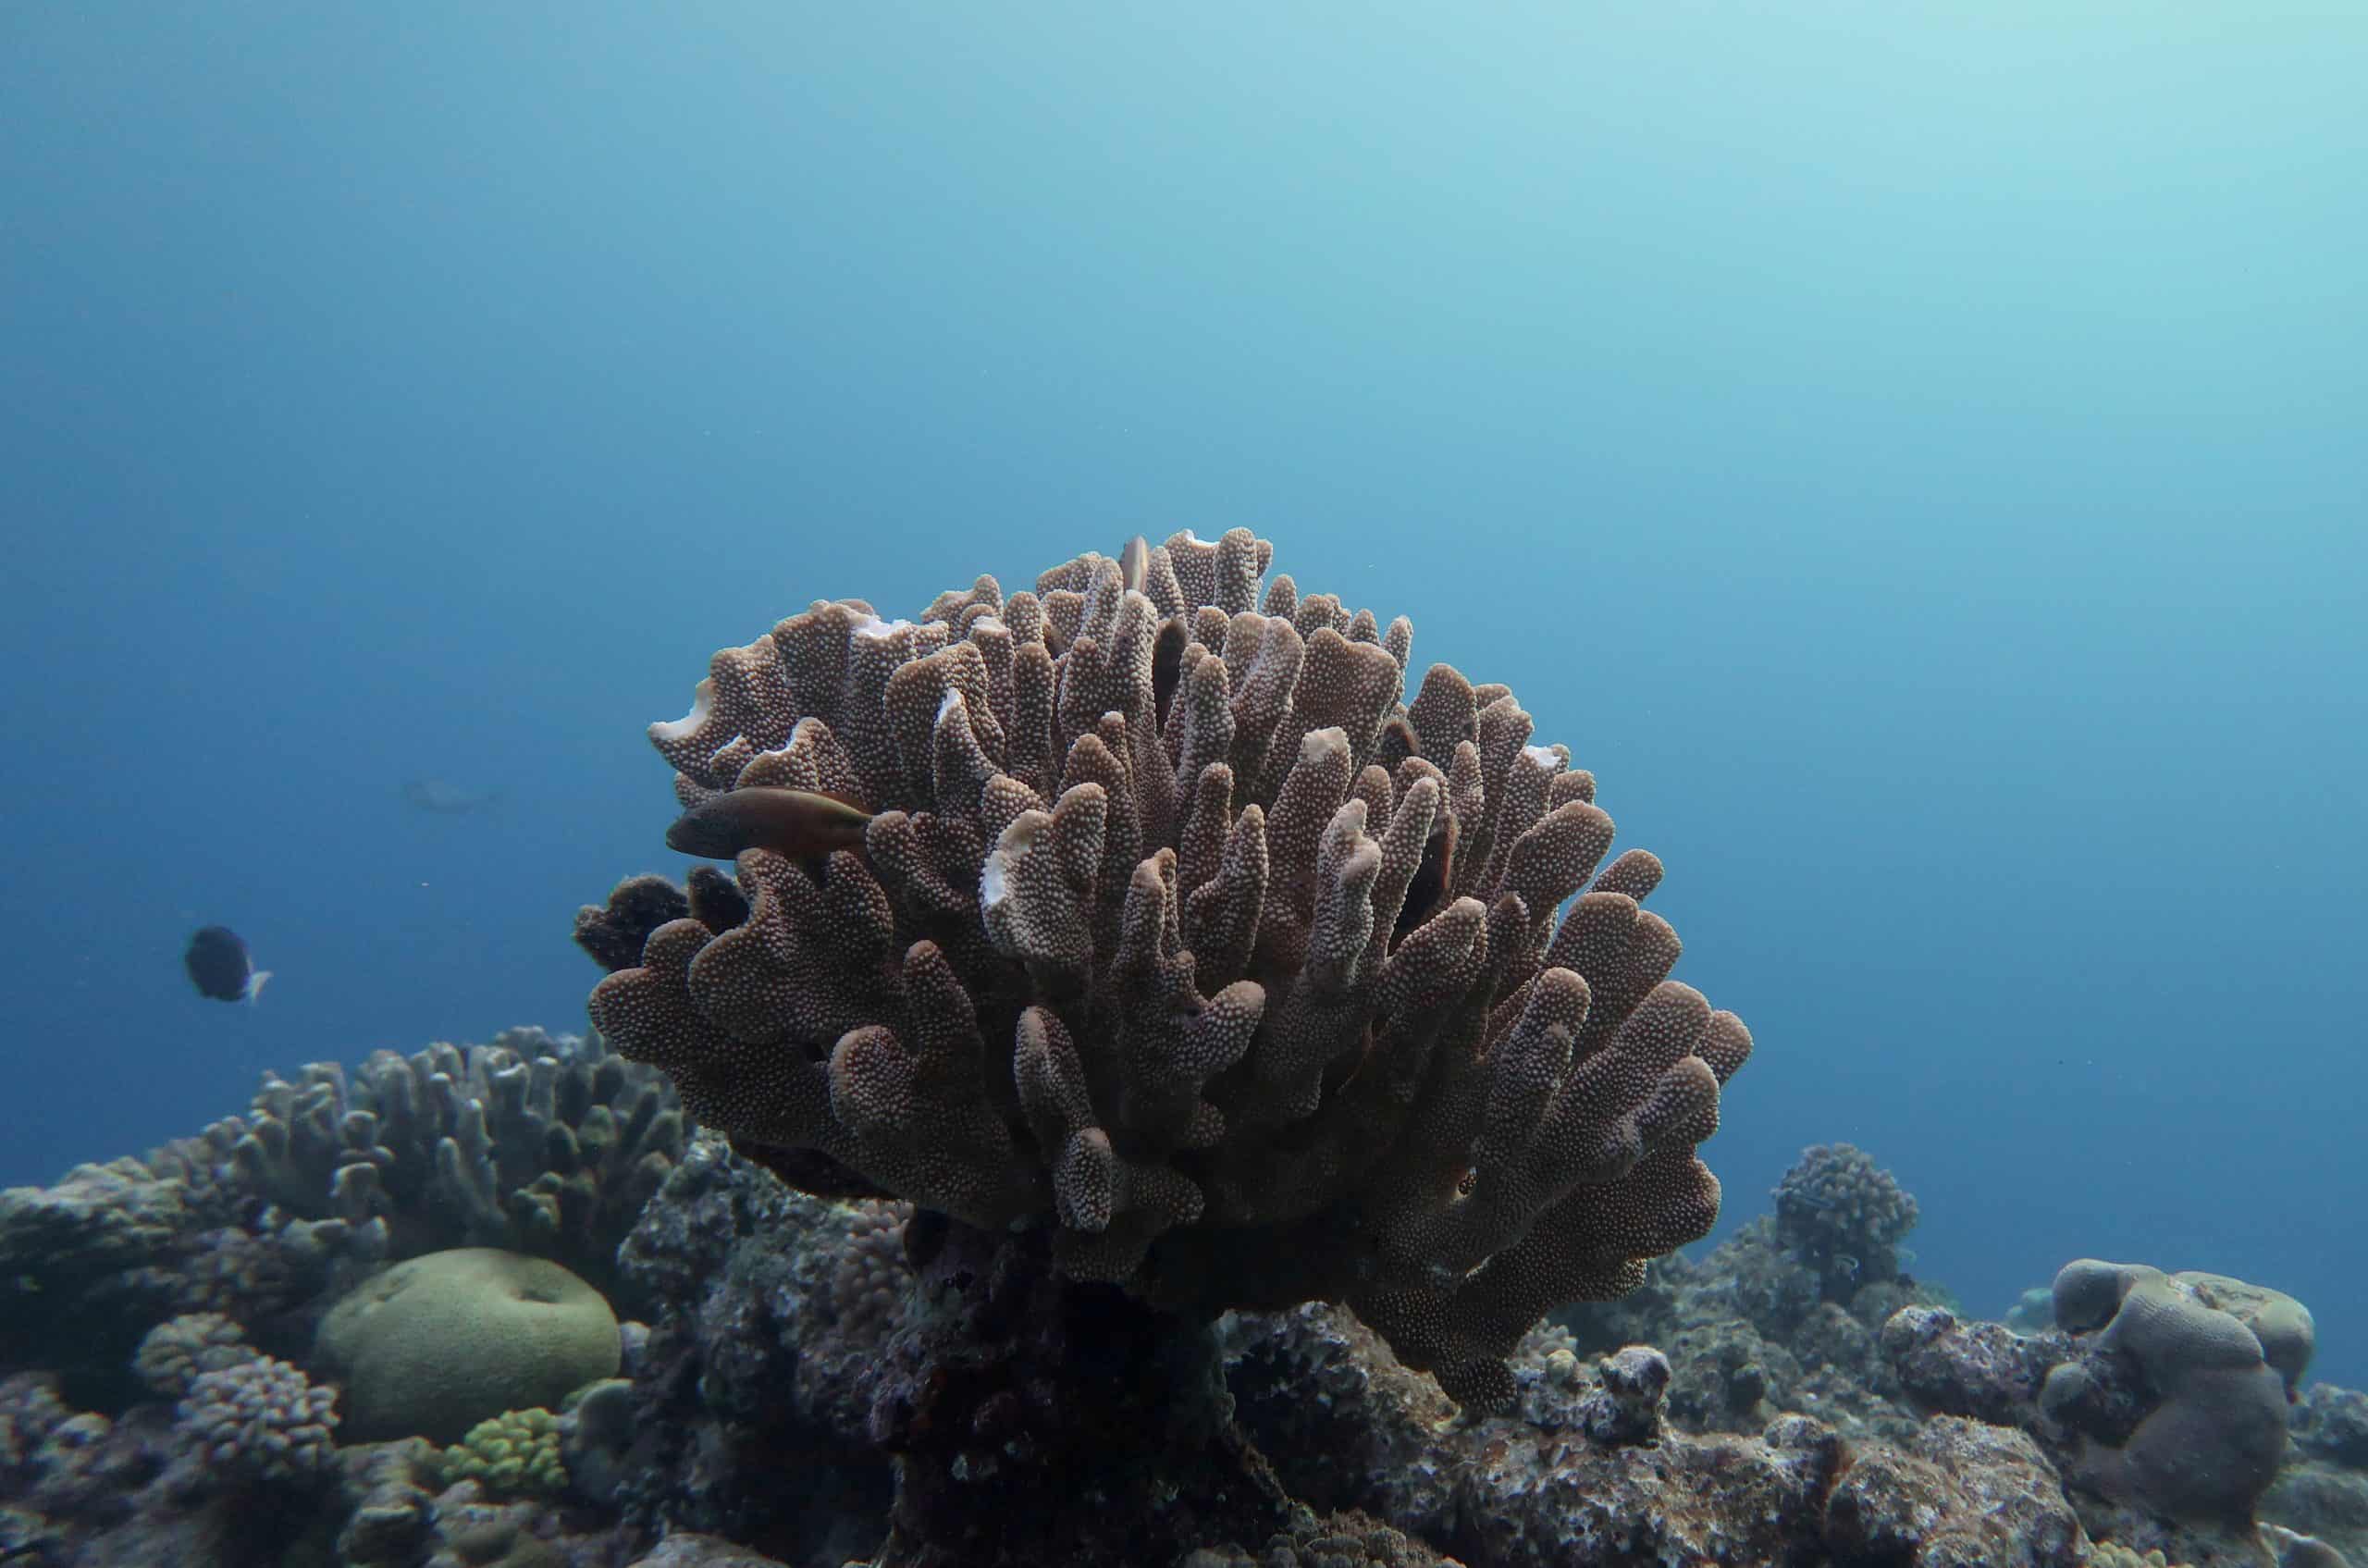 Great Barrier Reef ‘lost more than half its corals in the last 25 years’